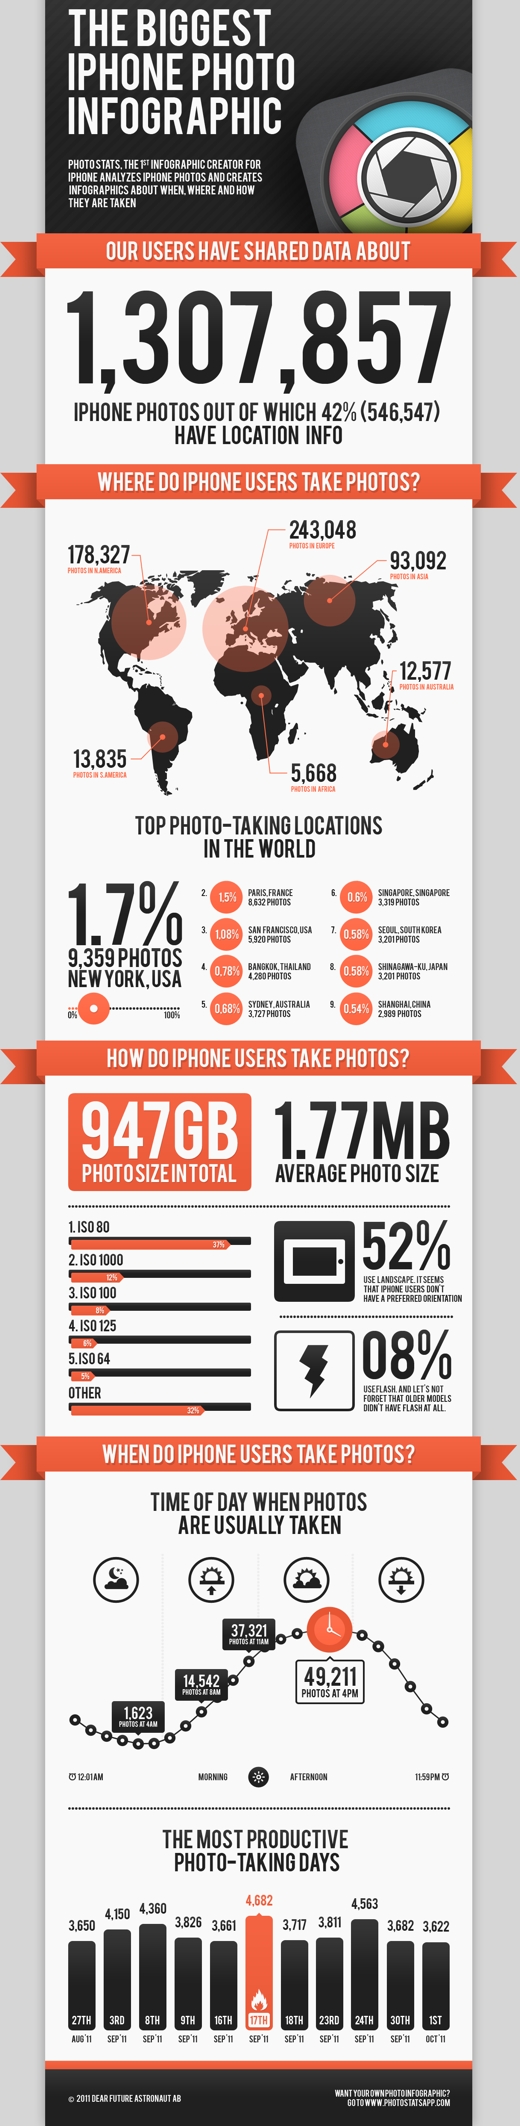 The Biggest iPhone Photo Infographic